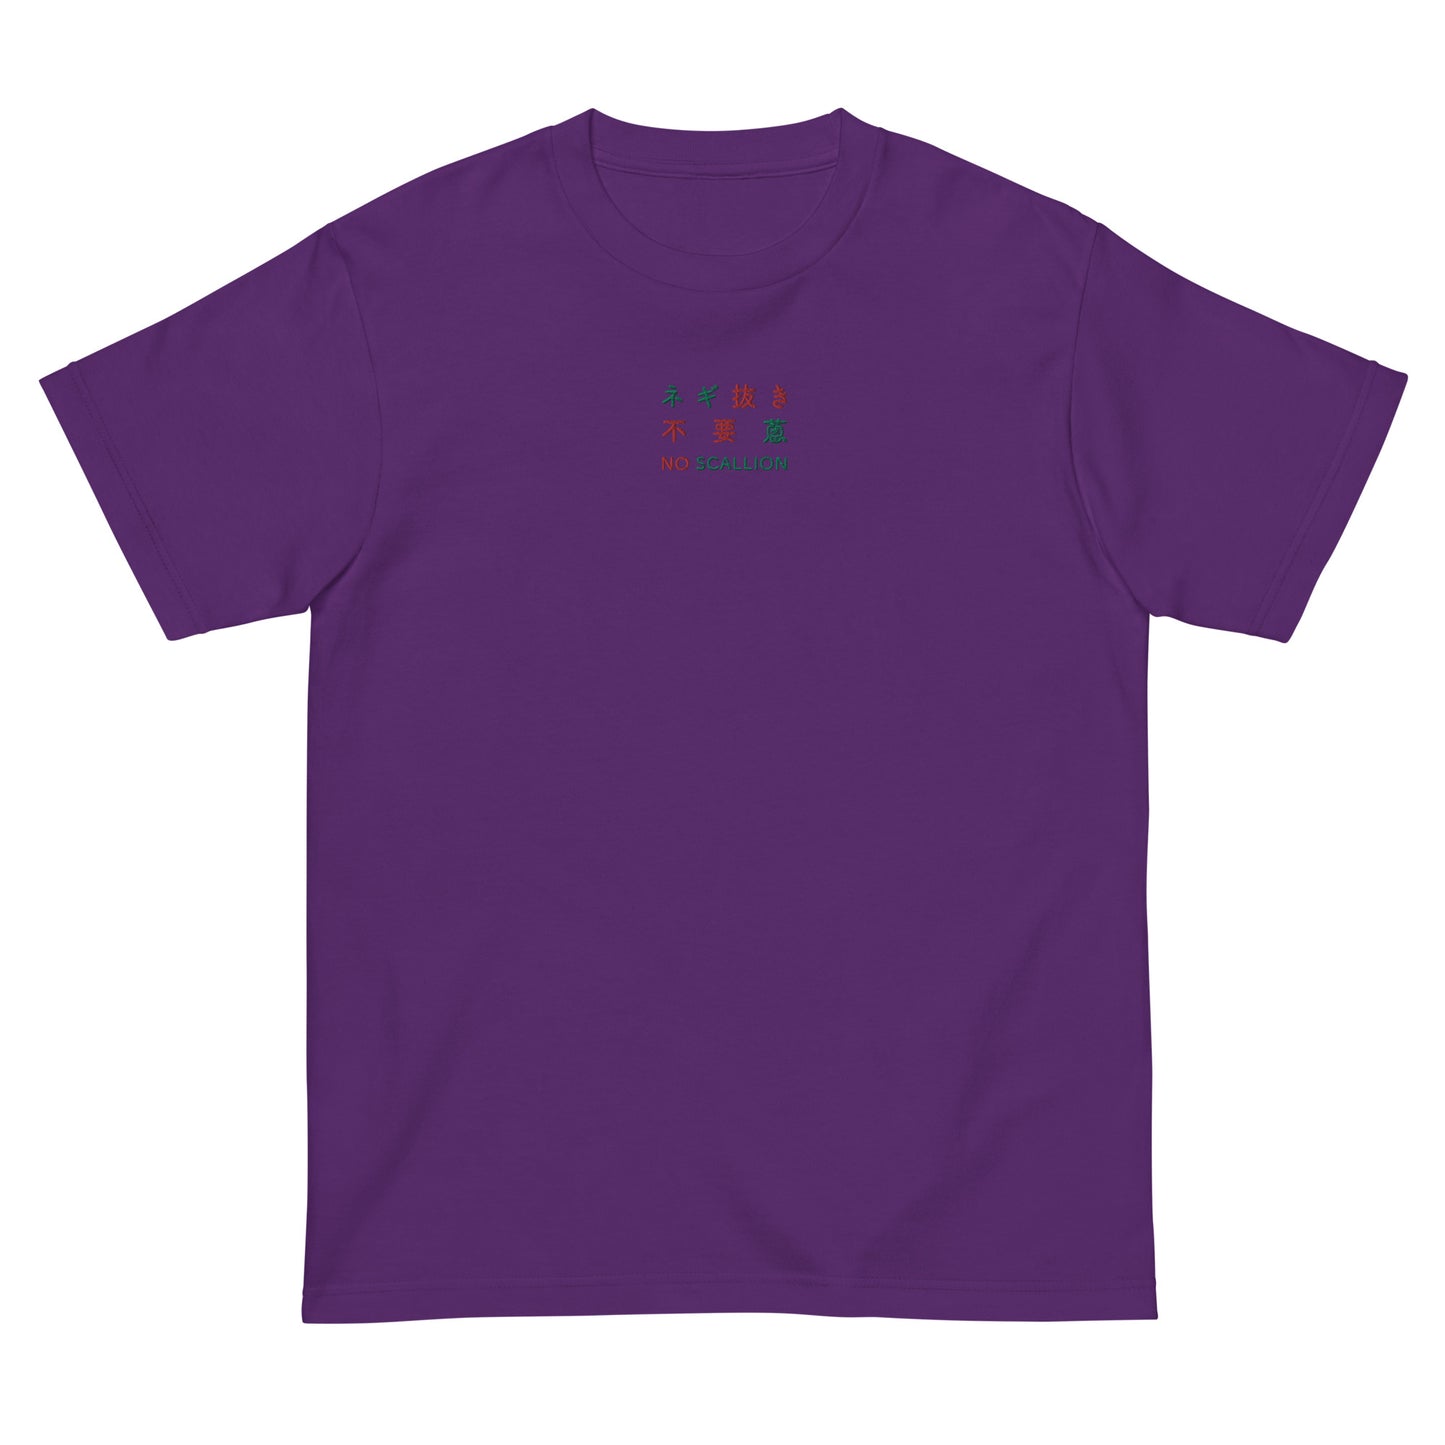 Purple High Quality Tee - Front Design with Red/Green Embroidery "NO SCALLIONit" in English, Japanese and Chinese